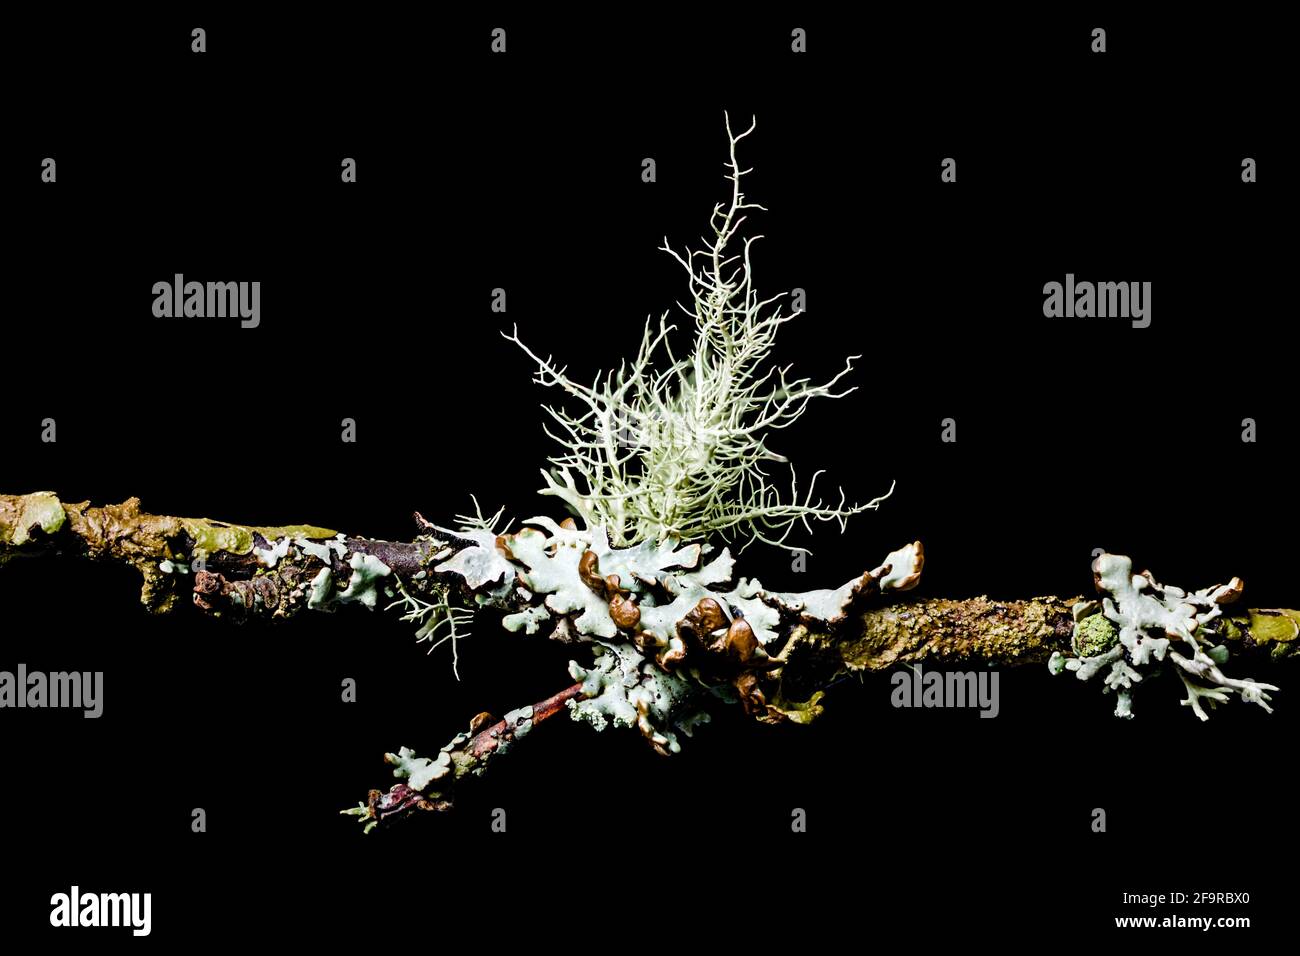 Lichen Usnea subfloridana also known as beard lichen or tree moss. Growing on small tree branches, taken under studio conditions. Stock Photo